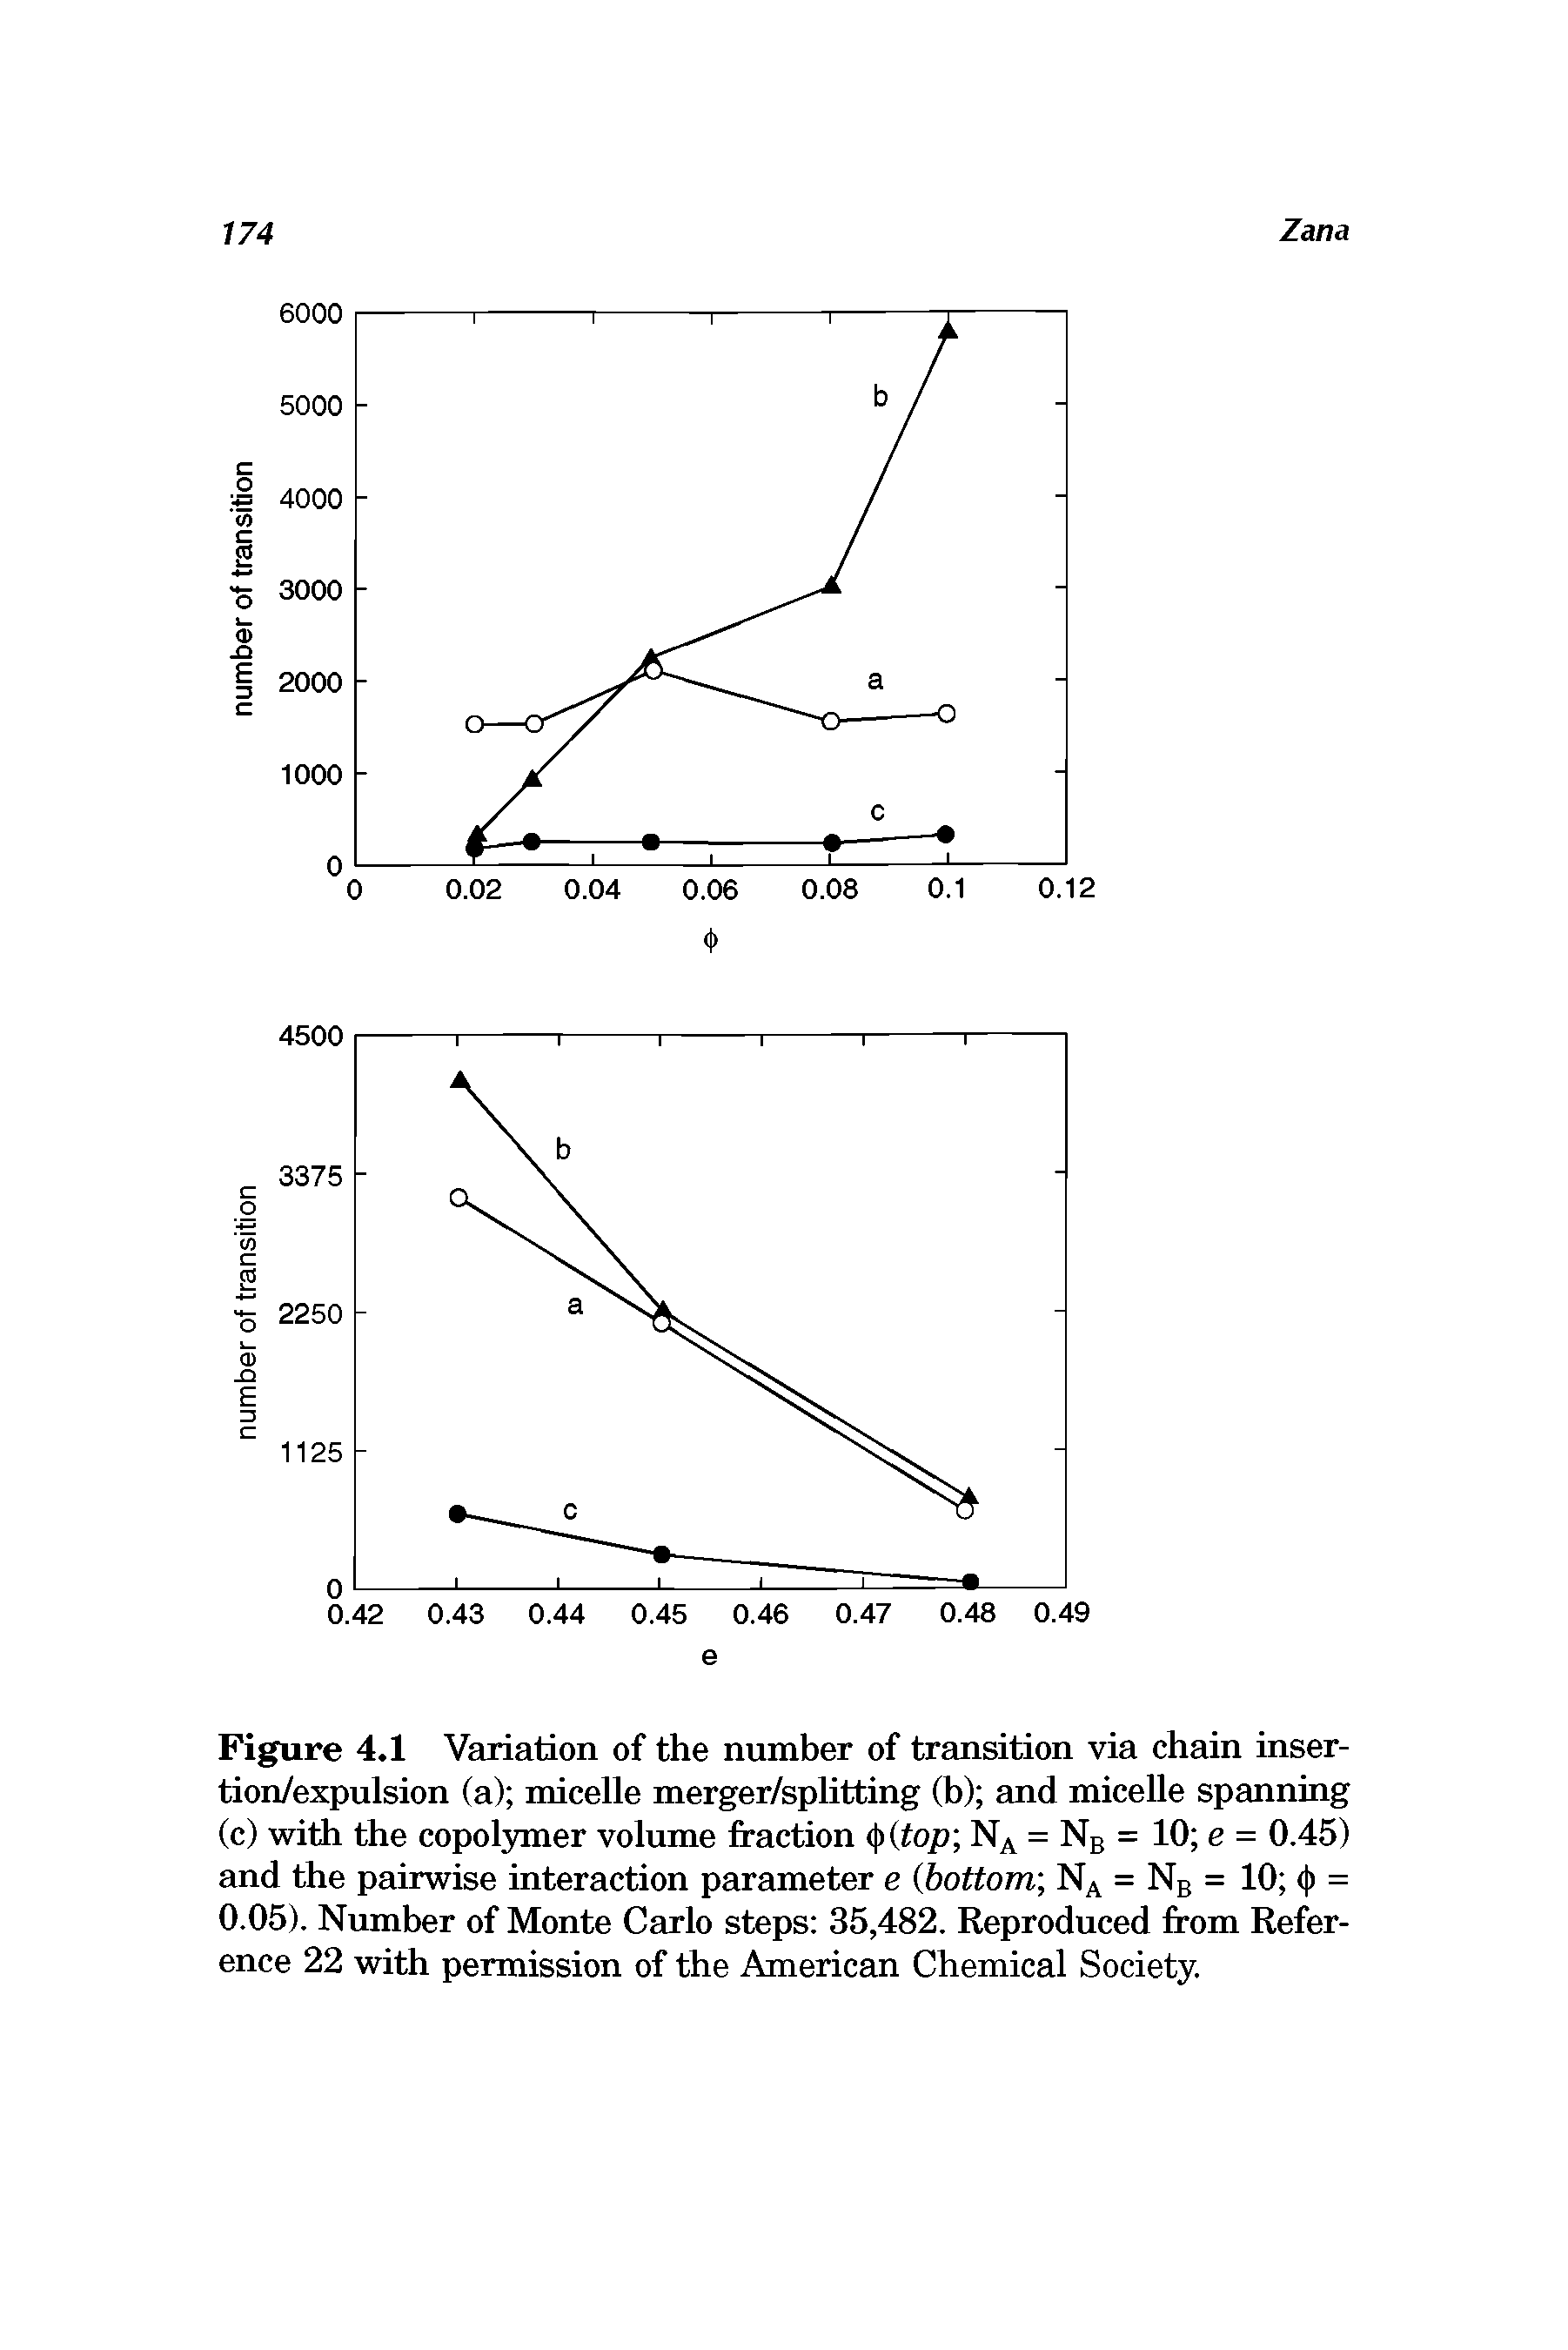 Figure 4.1 Variation of the number of transition via chain inser-tion/expulsion (a) micelle merger/sphtting (b) and micelle spanning (c) with the copolymer volume fraction (top = Nb = 10 e = 0.45) and the pairwise interaction parameter e bottom-, Na = Nb = 10 < ) = 0.05). Number of Monte Carlo steps 35,482. Reproduced from Reference 22 with permission of the American Chemical Society.